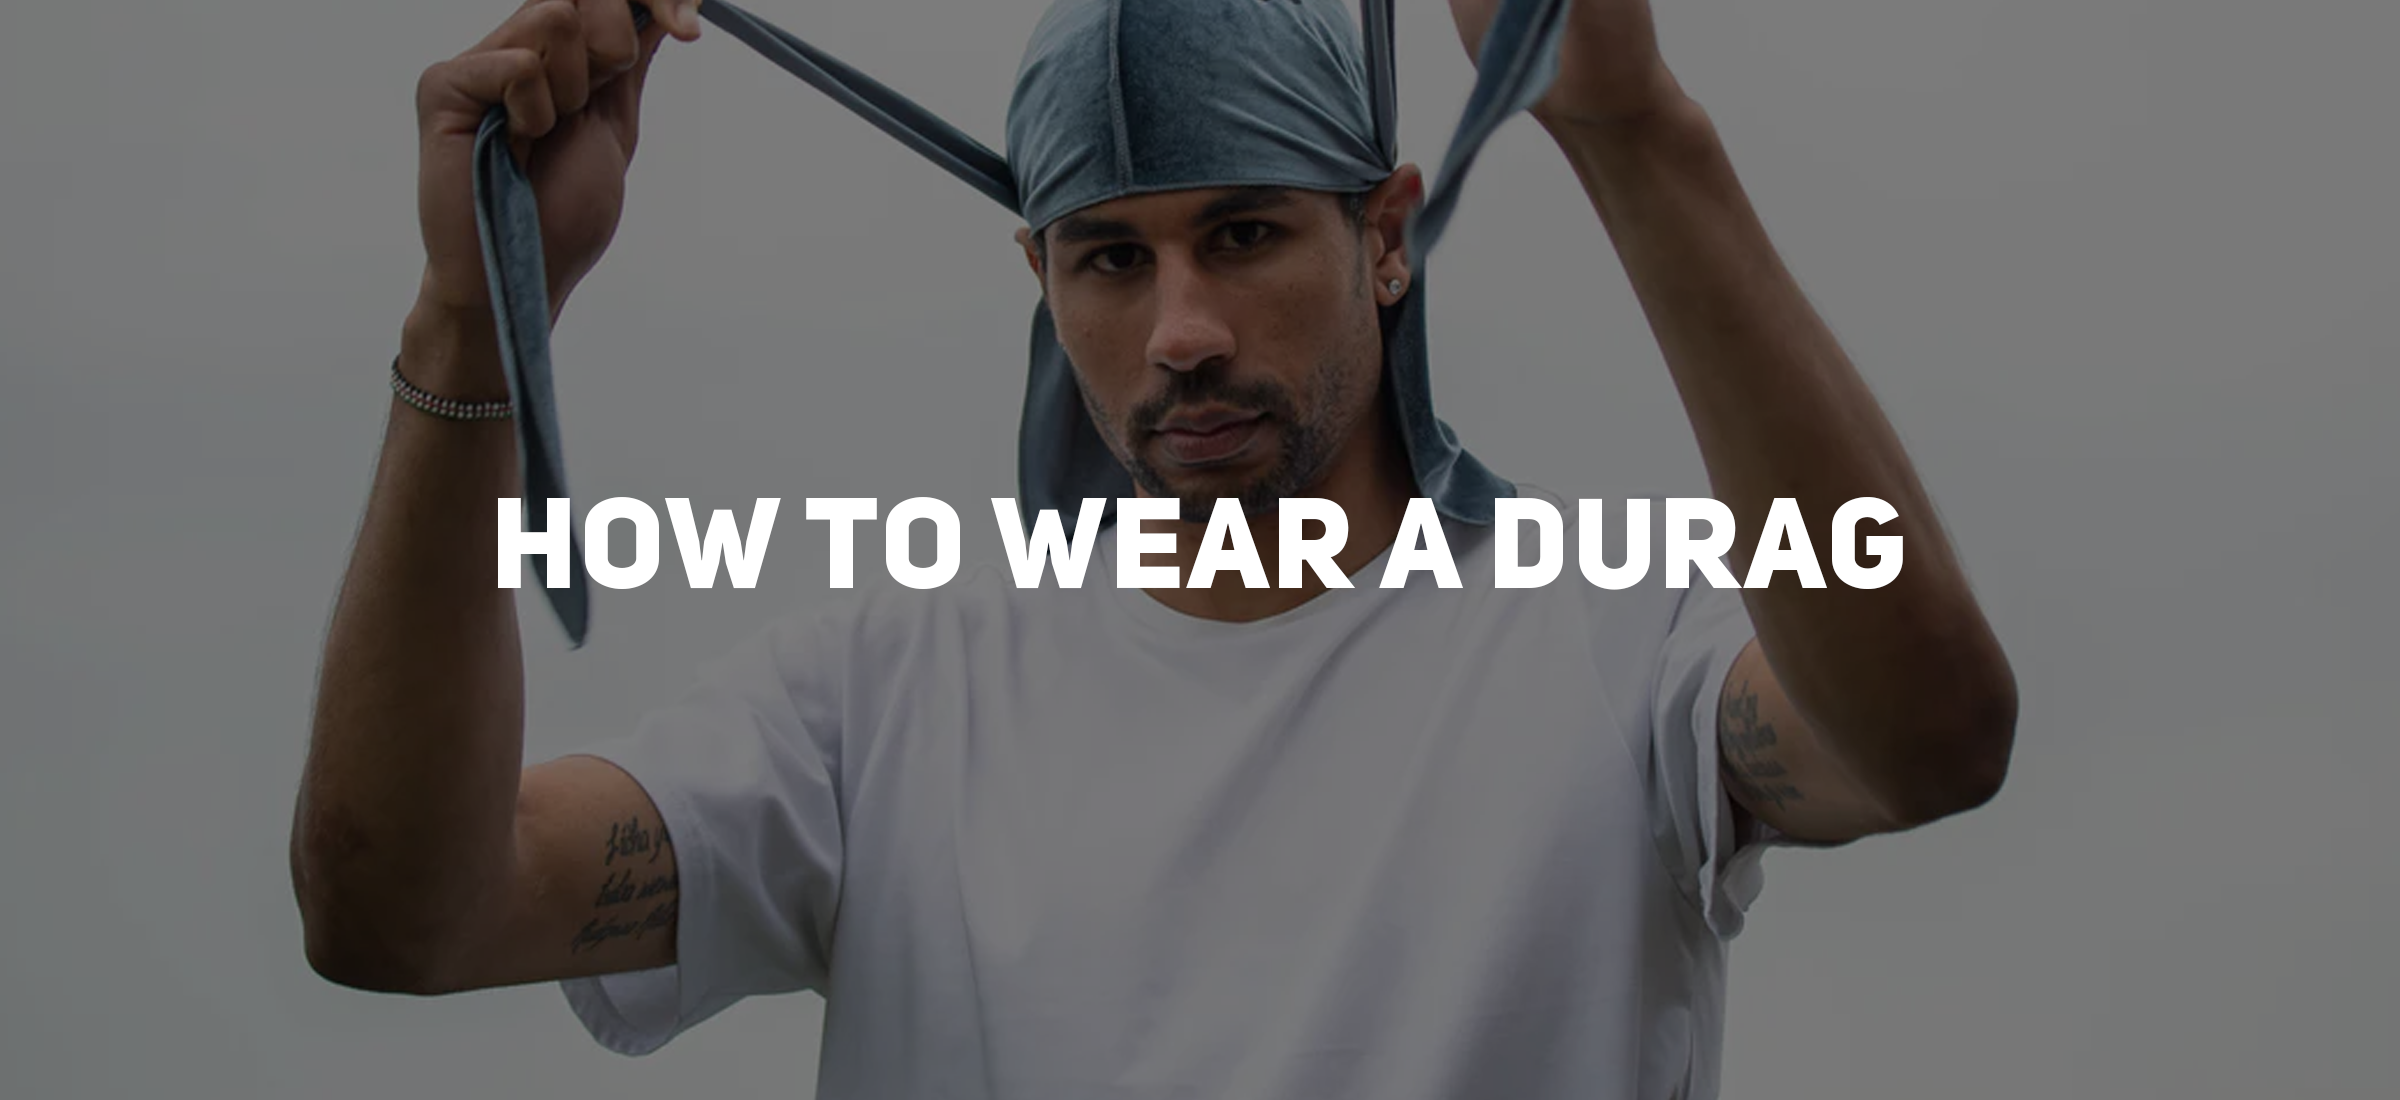 How to Put on a Durag: A Clear and Confident Guide